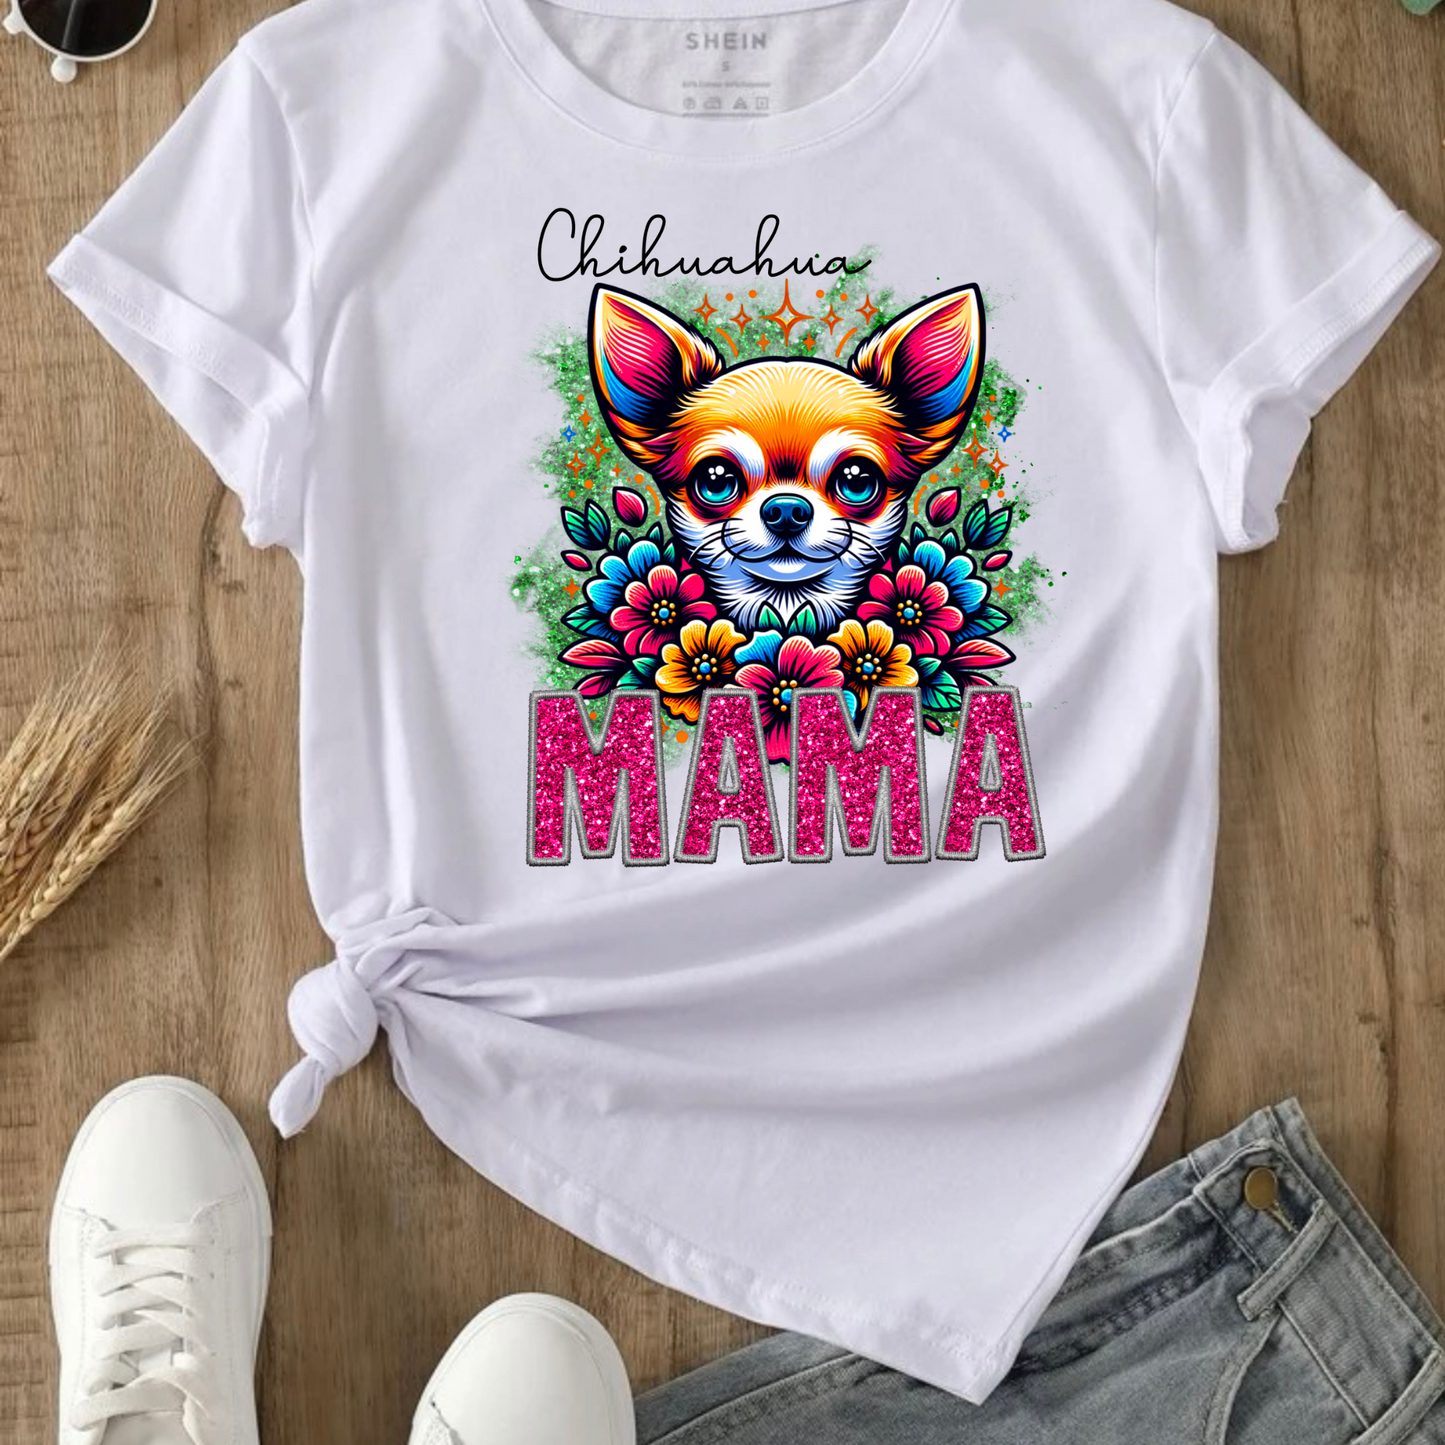 CORGI MAMA DESIGN! YOU CHOOSE COLOR AND STYLE! TEE OR CREWNECK! BLEACHED OR NON-BLEACHED